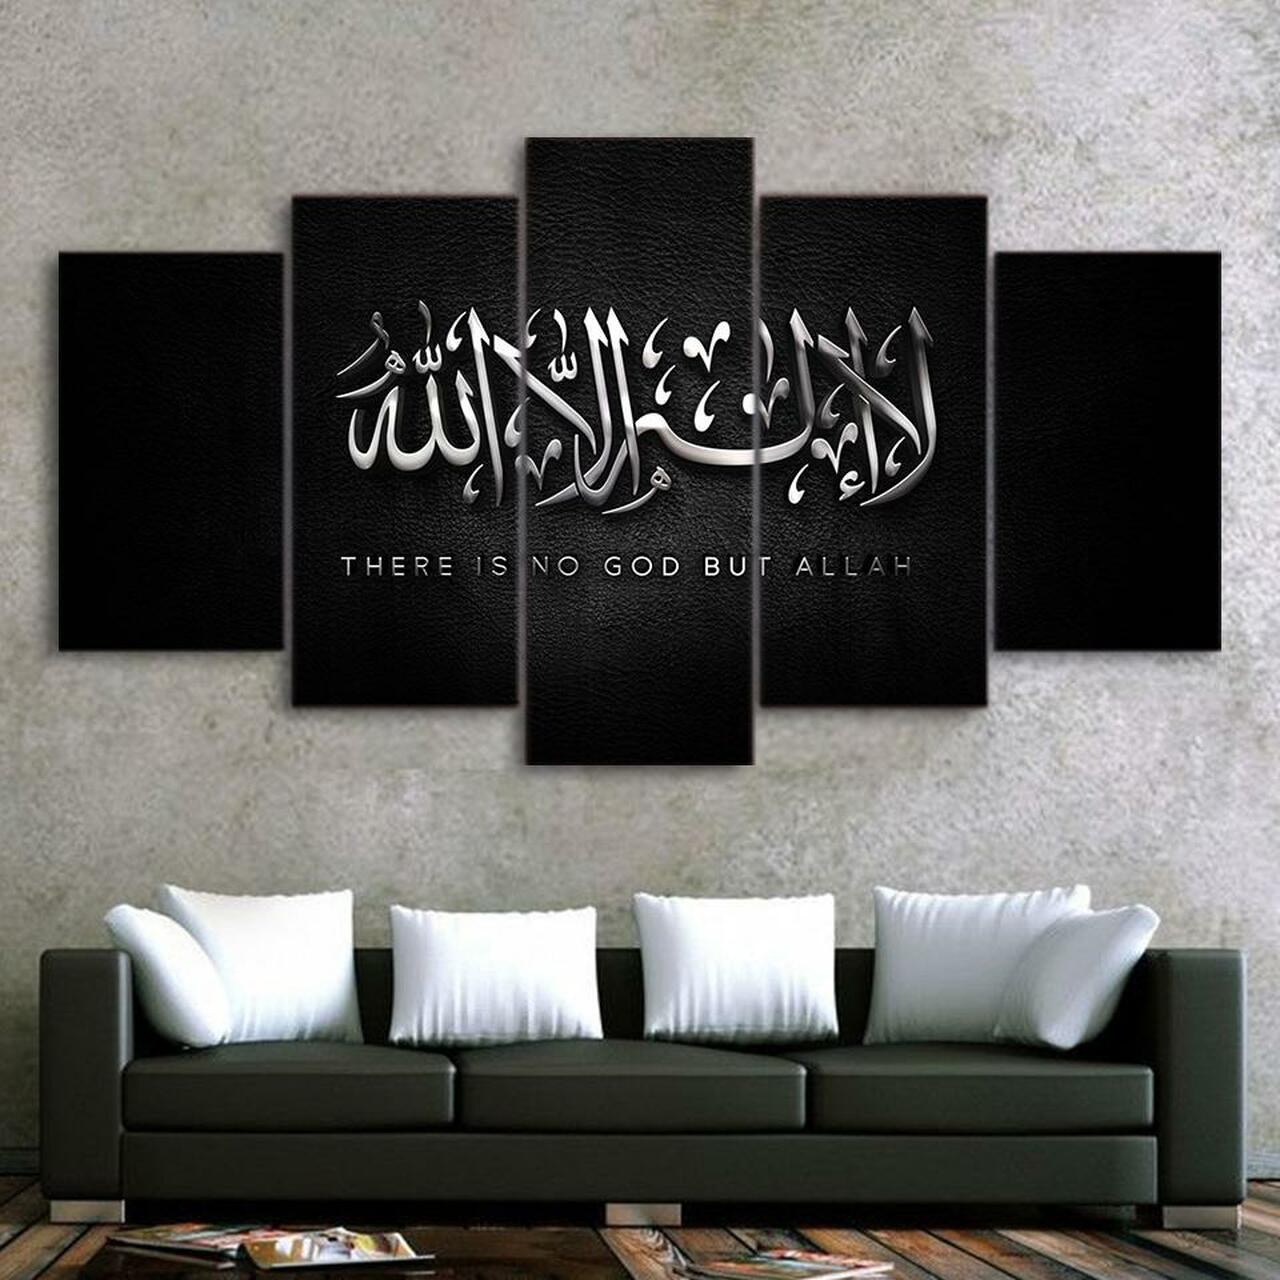 There Is No God But Allah 5 Piece Canvas Art Wall Decor